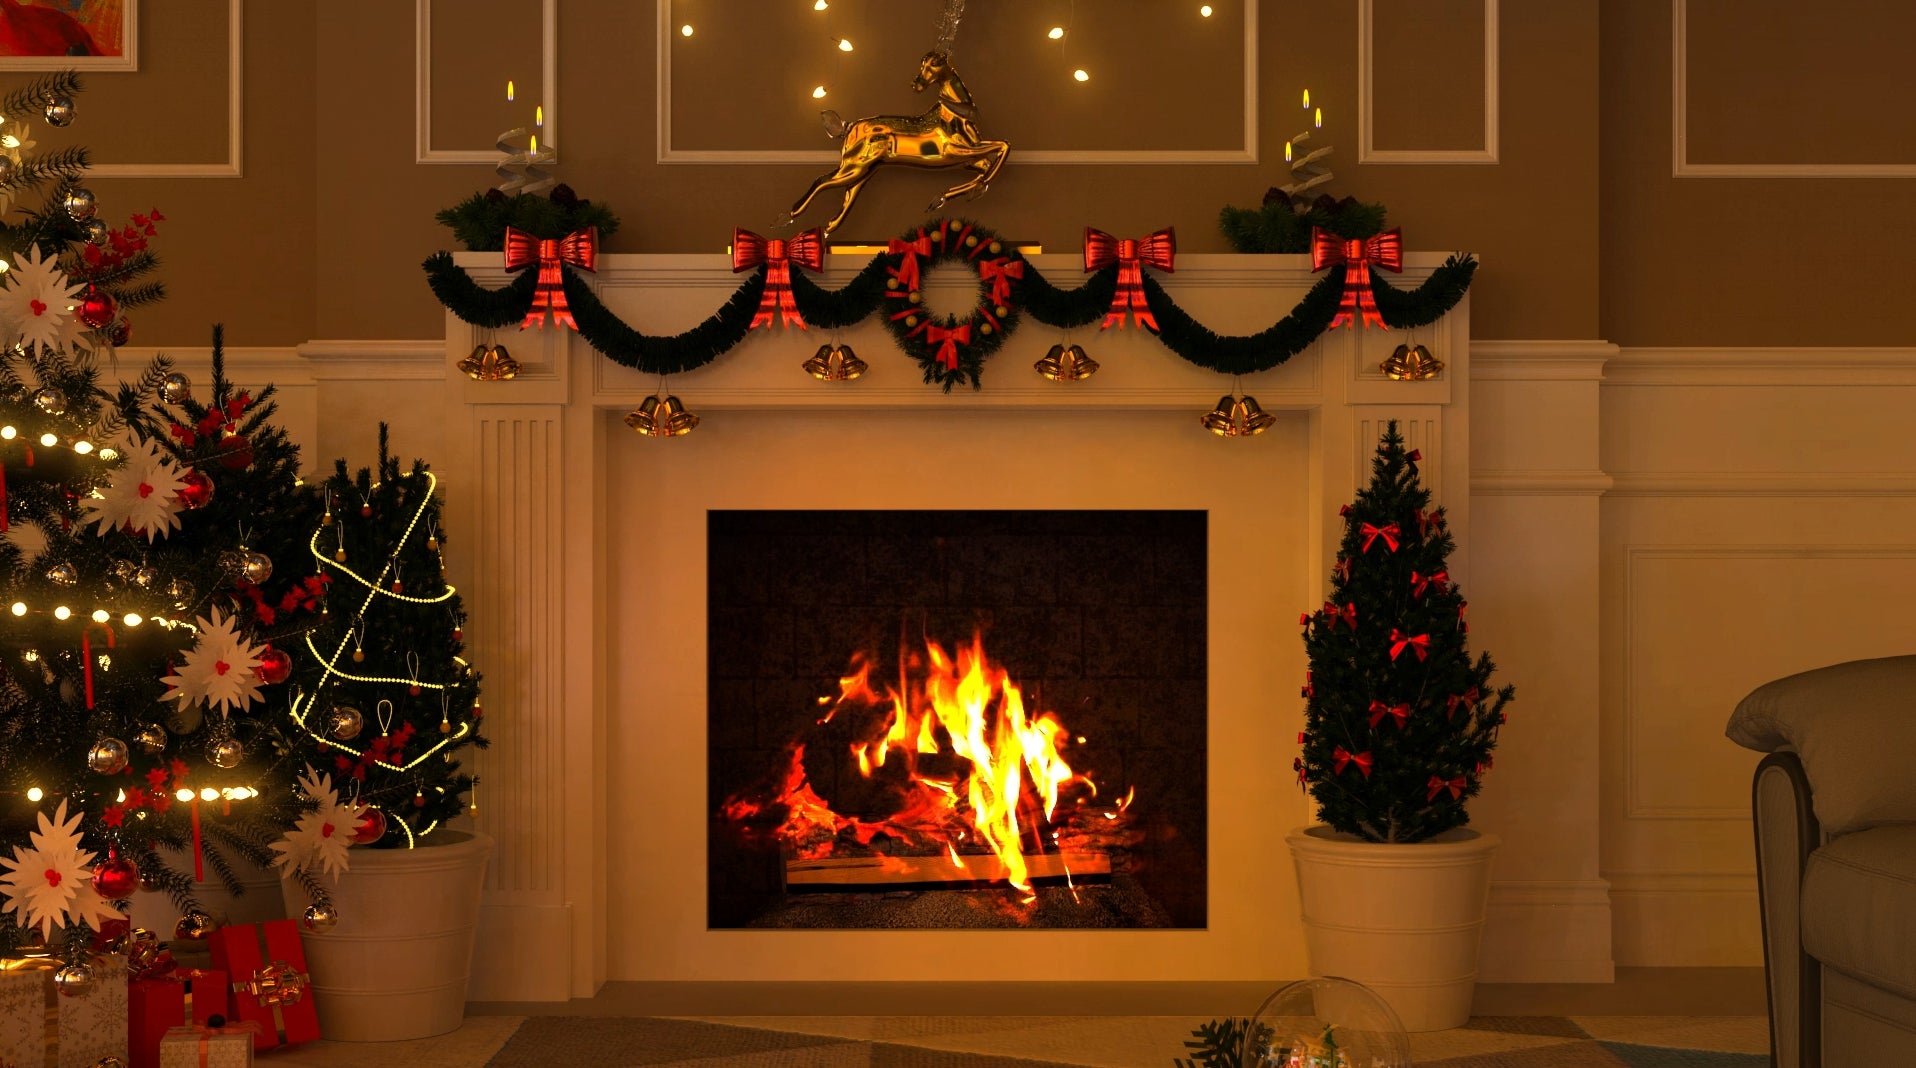 Christmas Decoration Videos - Fireplace with Cracking Sound